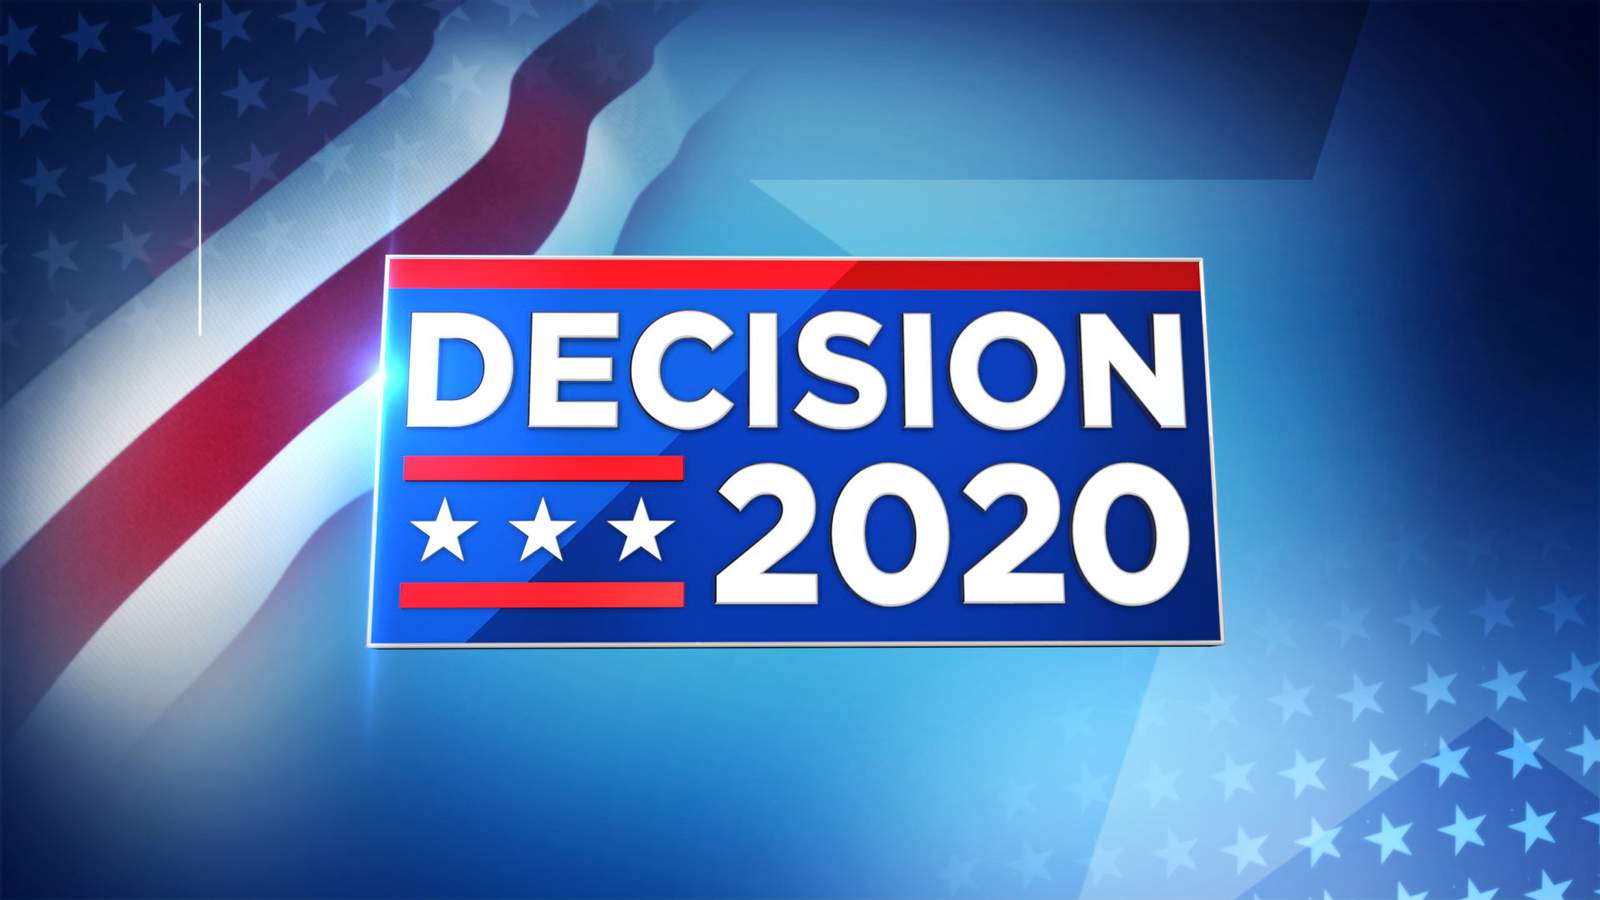 Michigan Primary Election Results for Macomb County on Aug. 4, 2020